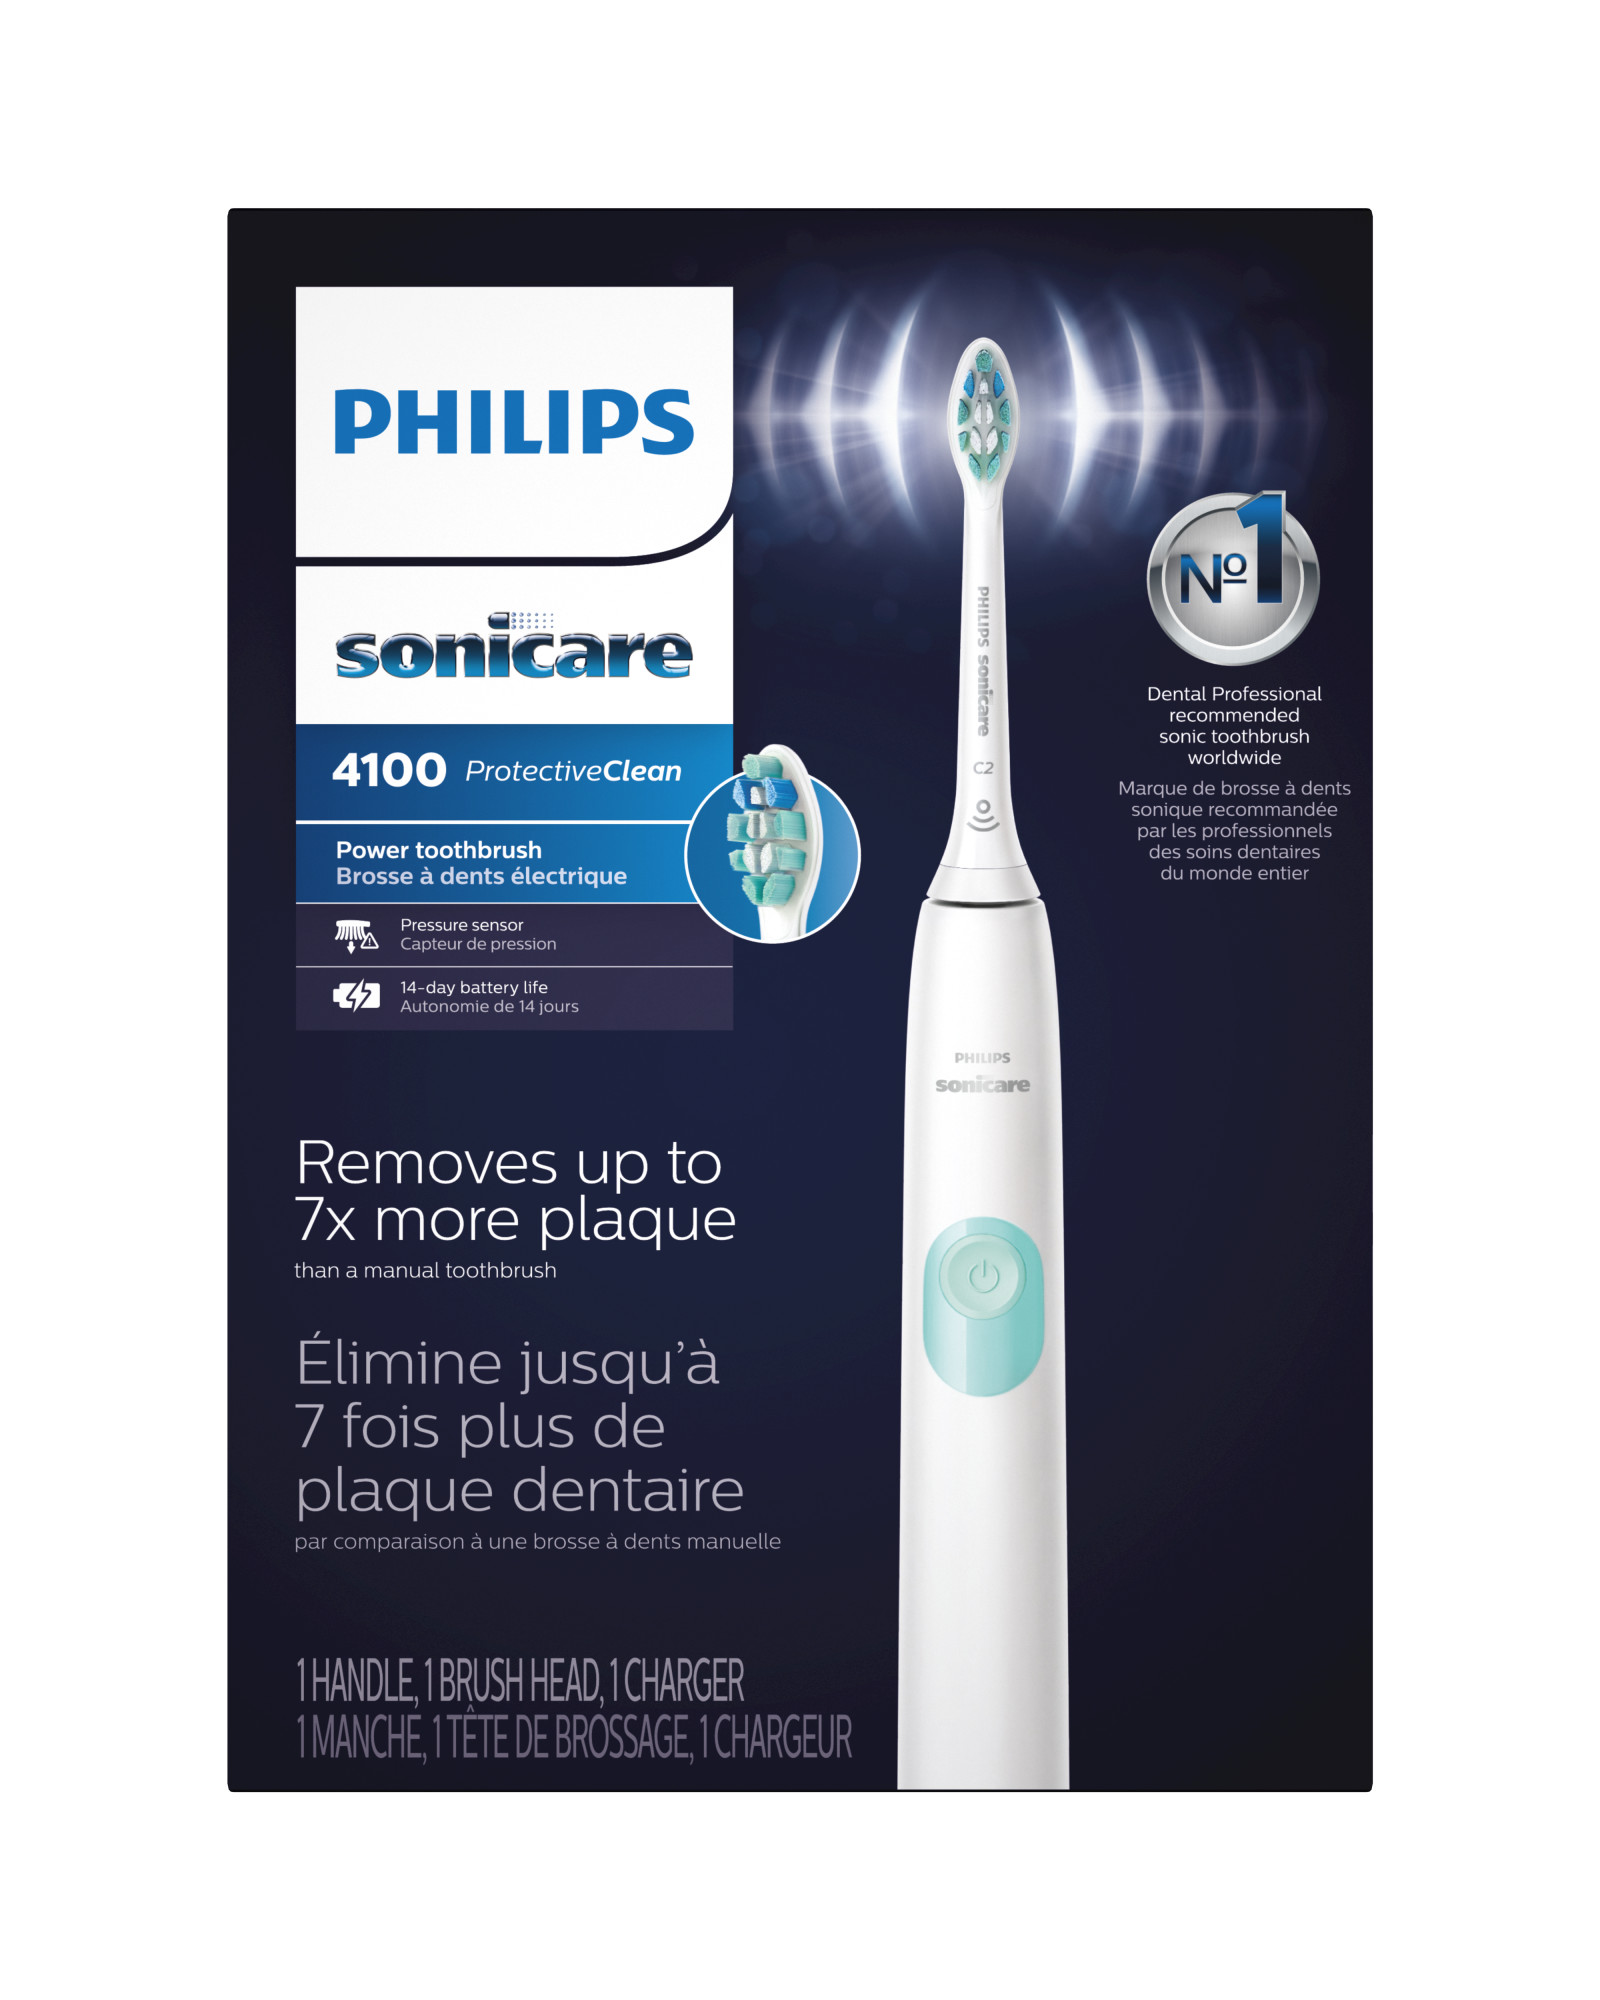 Philips Sonicare ProtectiveClean 4100 Plaque Control, Rechargeable Electric Toothbrush with Pressure Sensor, White Mint HX6817/01 - image 13 of 14